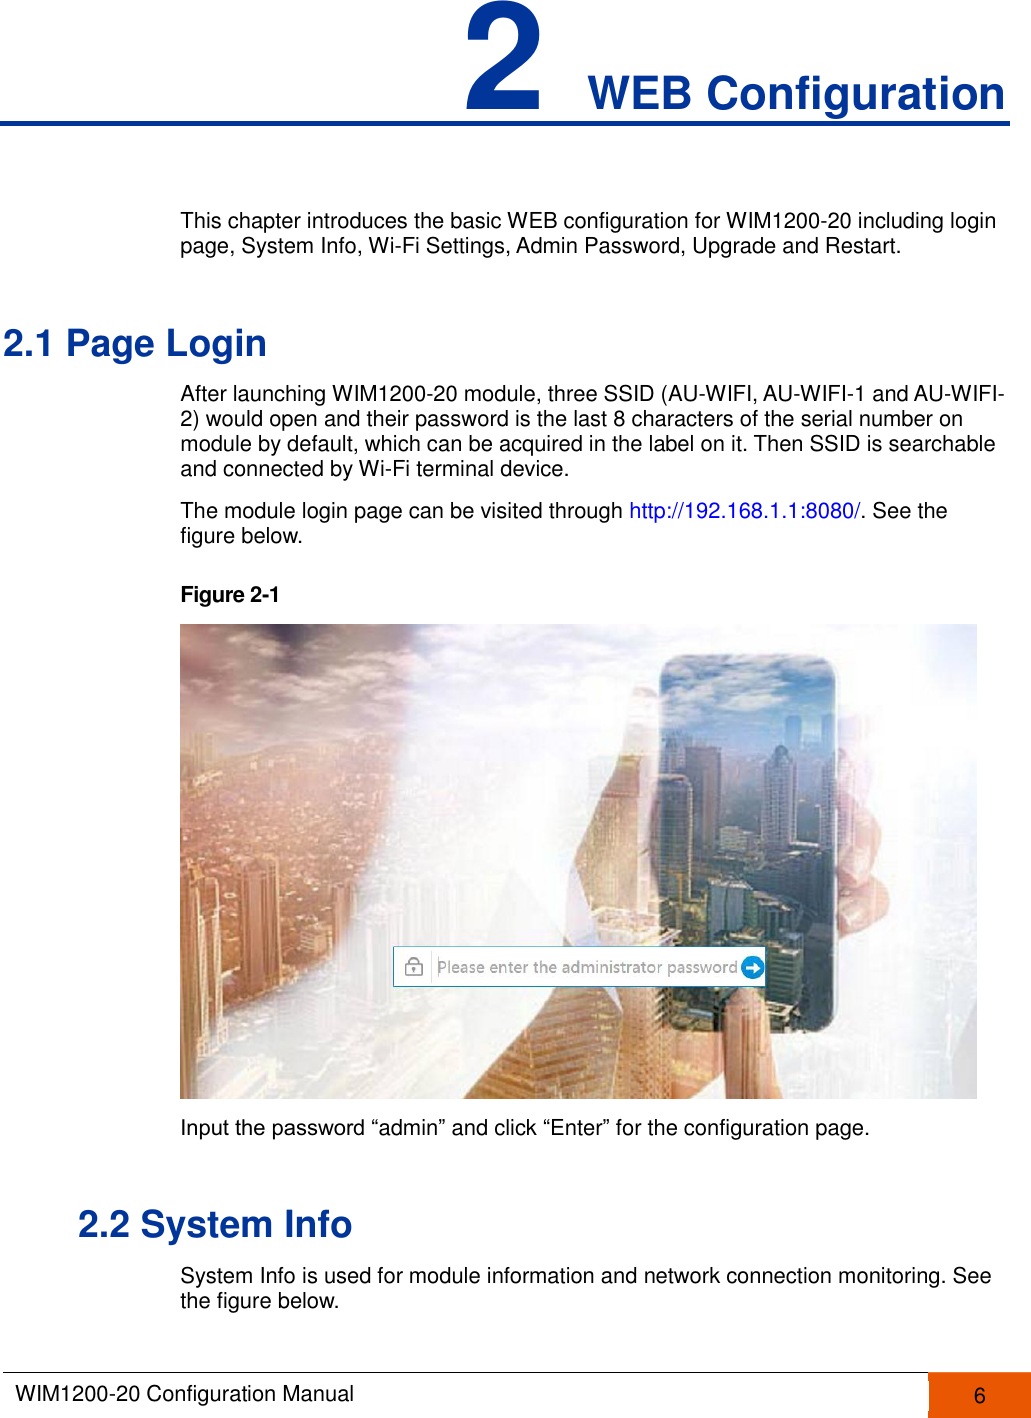  WIM1200-20 Configuration Manual   6  2 WEB Configuration This chapter introduces the basic WEB configuration for WIM1200-20 including login page, System Info, Wi-Fi Settings, Admin Password, Upgrade and Restart. 2.1 Page Login After launching WIM1200-20 module, three SSID (AU-WIFI, AU-WIFI-1 and AU-WIFI-2) would open and their password is the last 8 characters of the serial number on module by default, which can be acquired in the label on it. Then SSID is searchable and connected by Wi-Fi terminal device. The module login page can be visited through http://192.168.1.1:8080/. See the figure below. Figure 2-1   Input the password “admin” and click “Enter” for the configuration page. 2.2 System Info System Info is used for module information and network connection monitoring. See the figure below. 